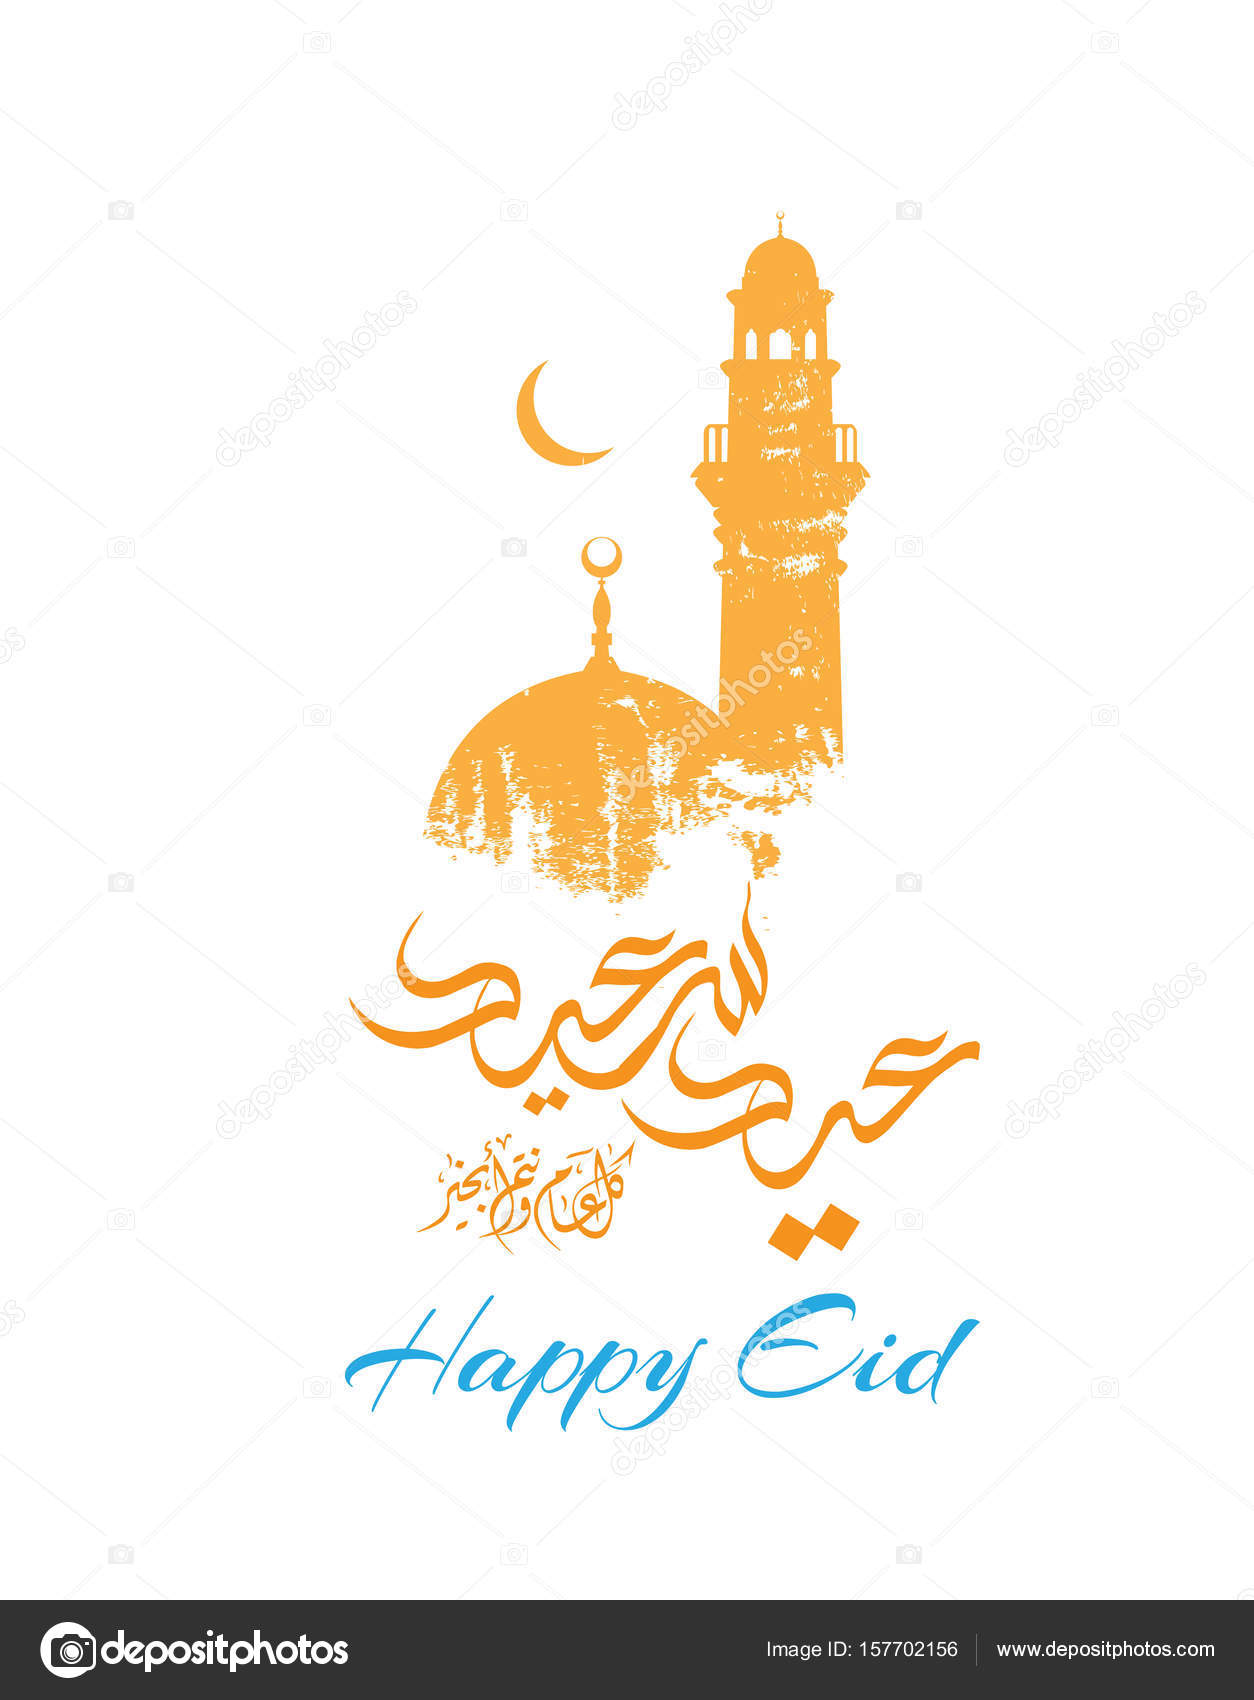 Greetings card on the occasion of Eid al-Fitr to the 